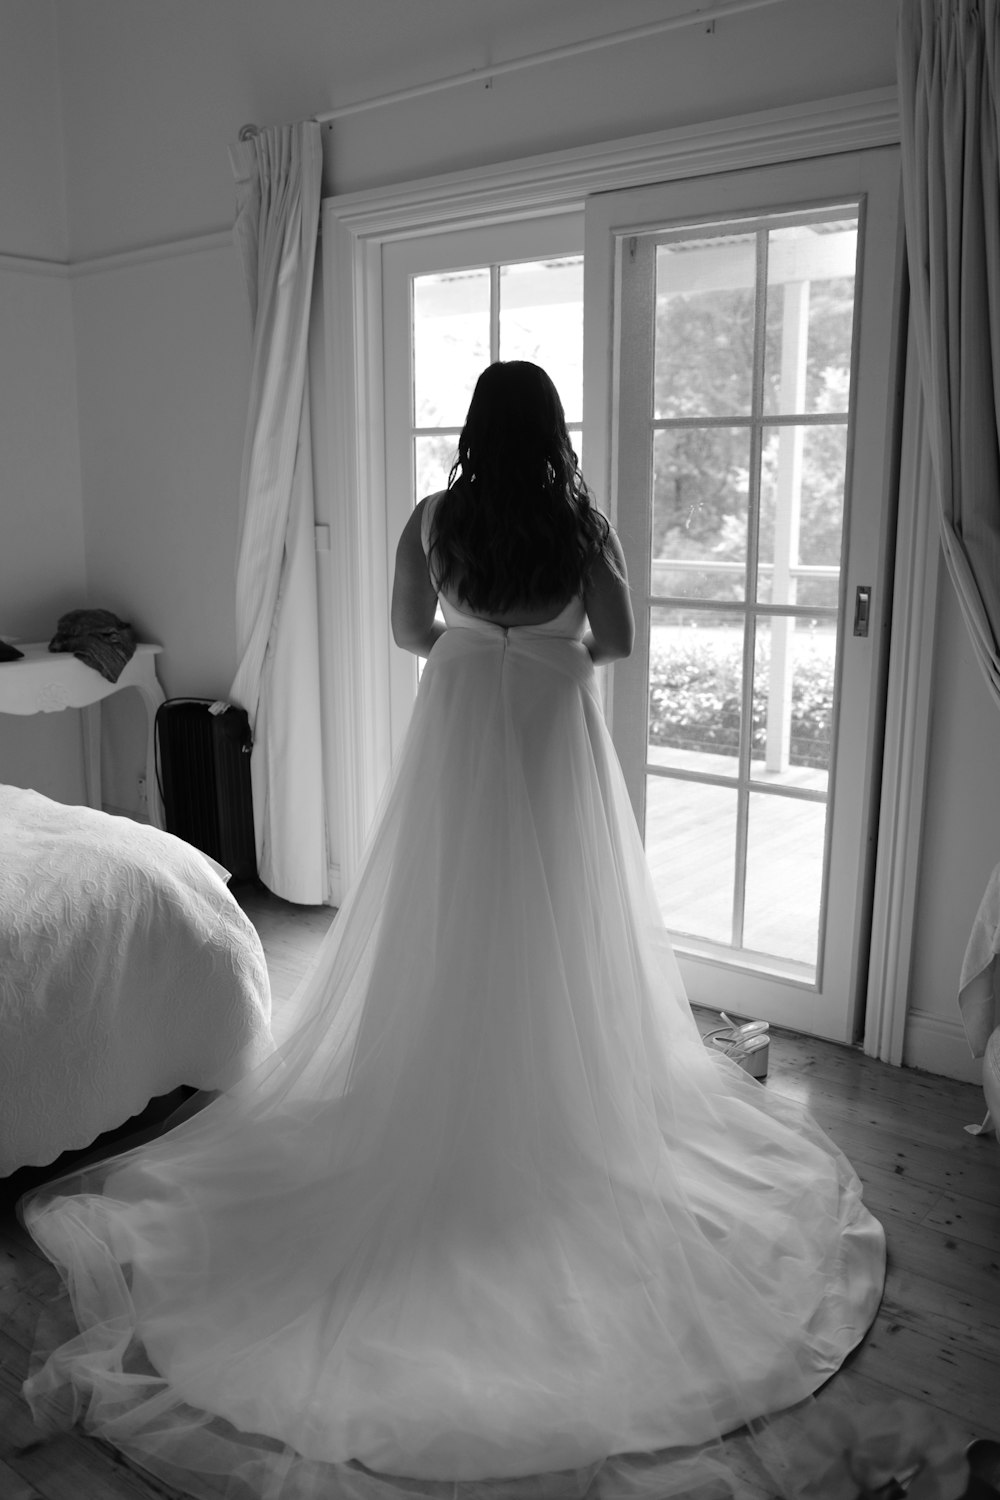 a woman in a wedding dress standing in front of a window